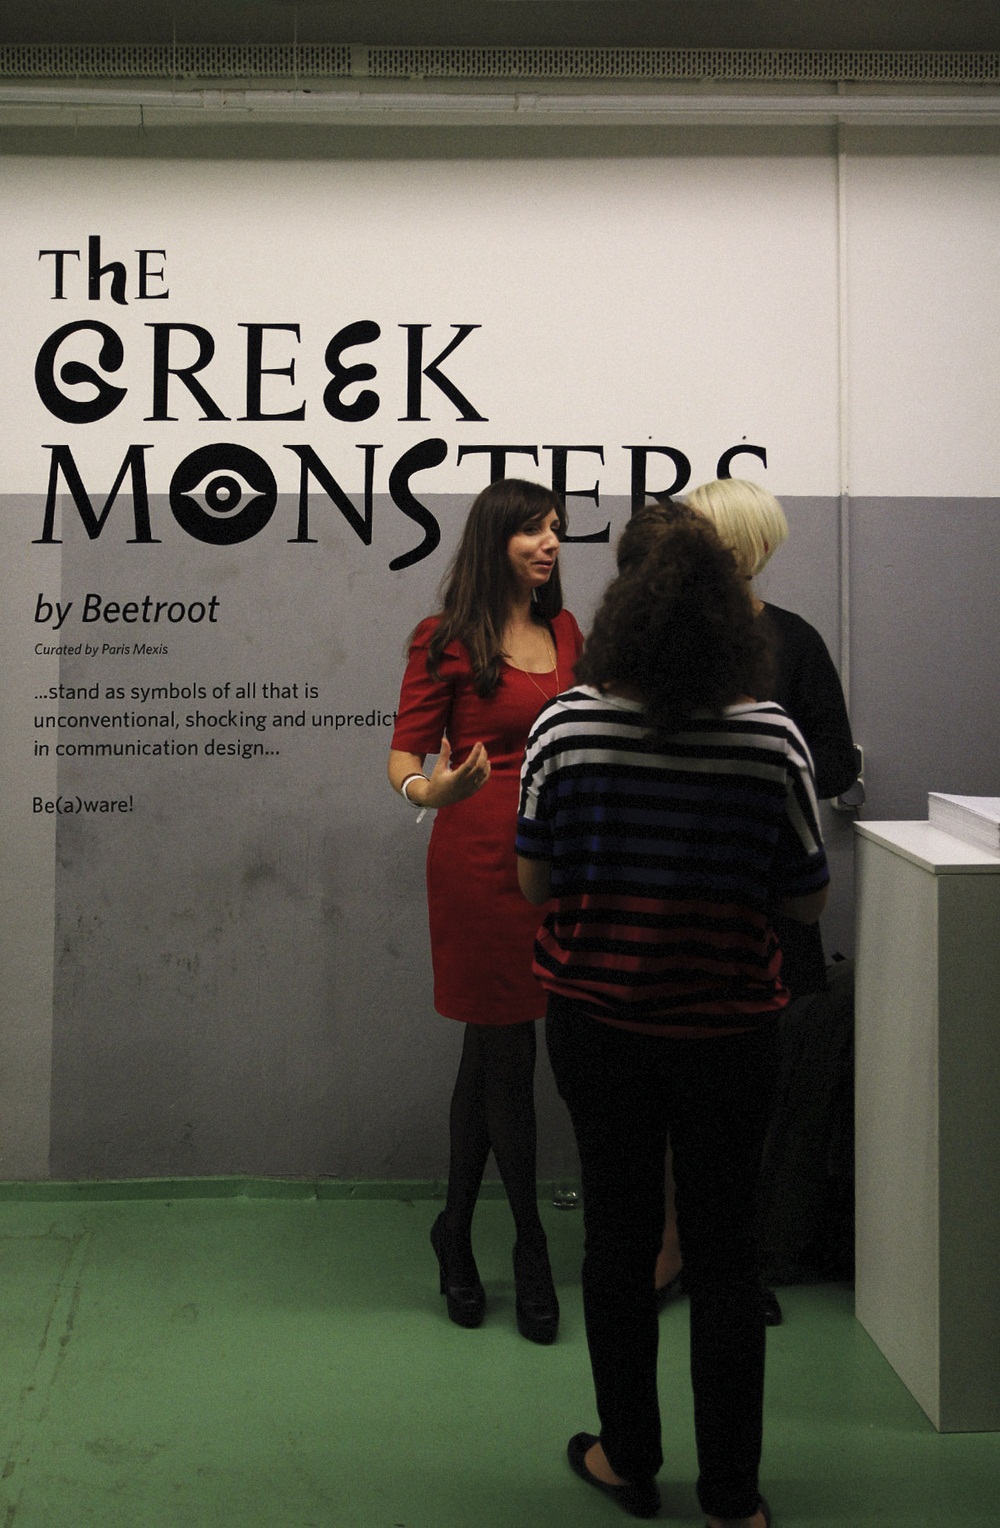 Archisearch - beetroot-reddot-GreekMonsters